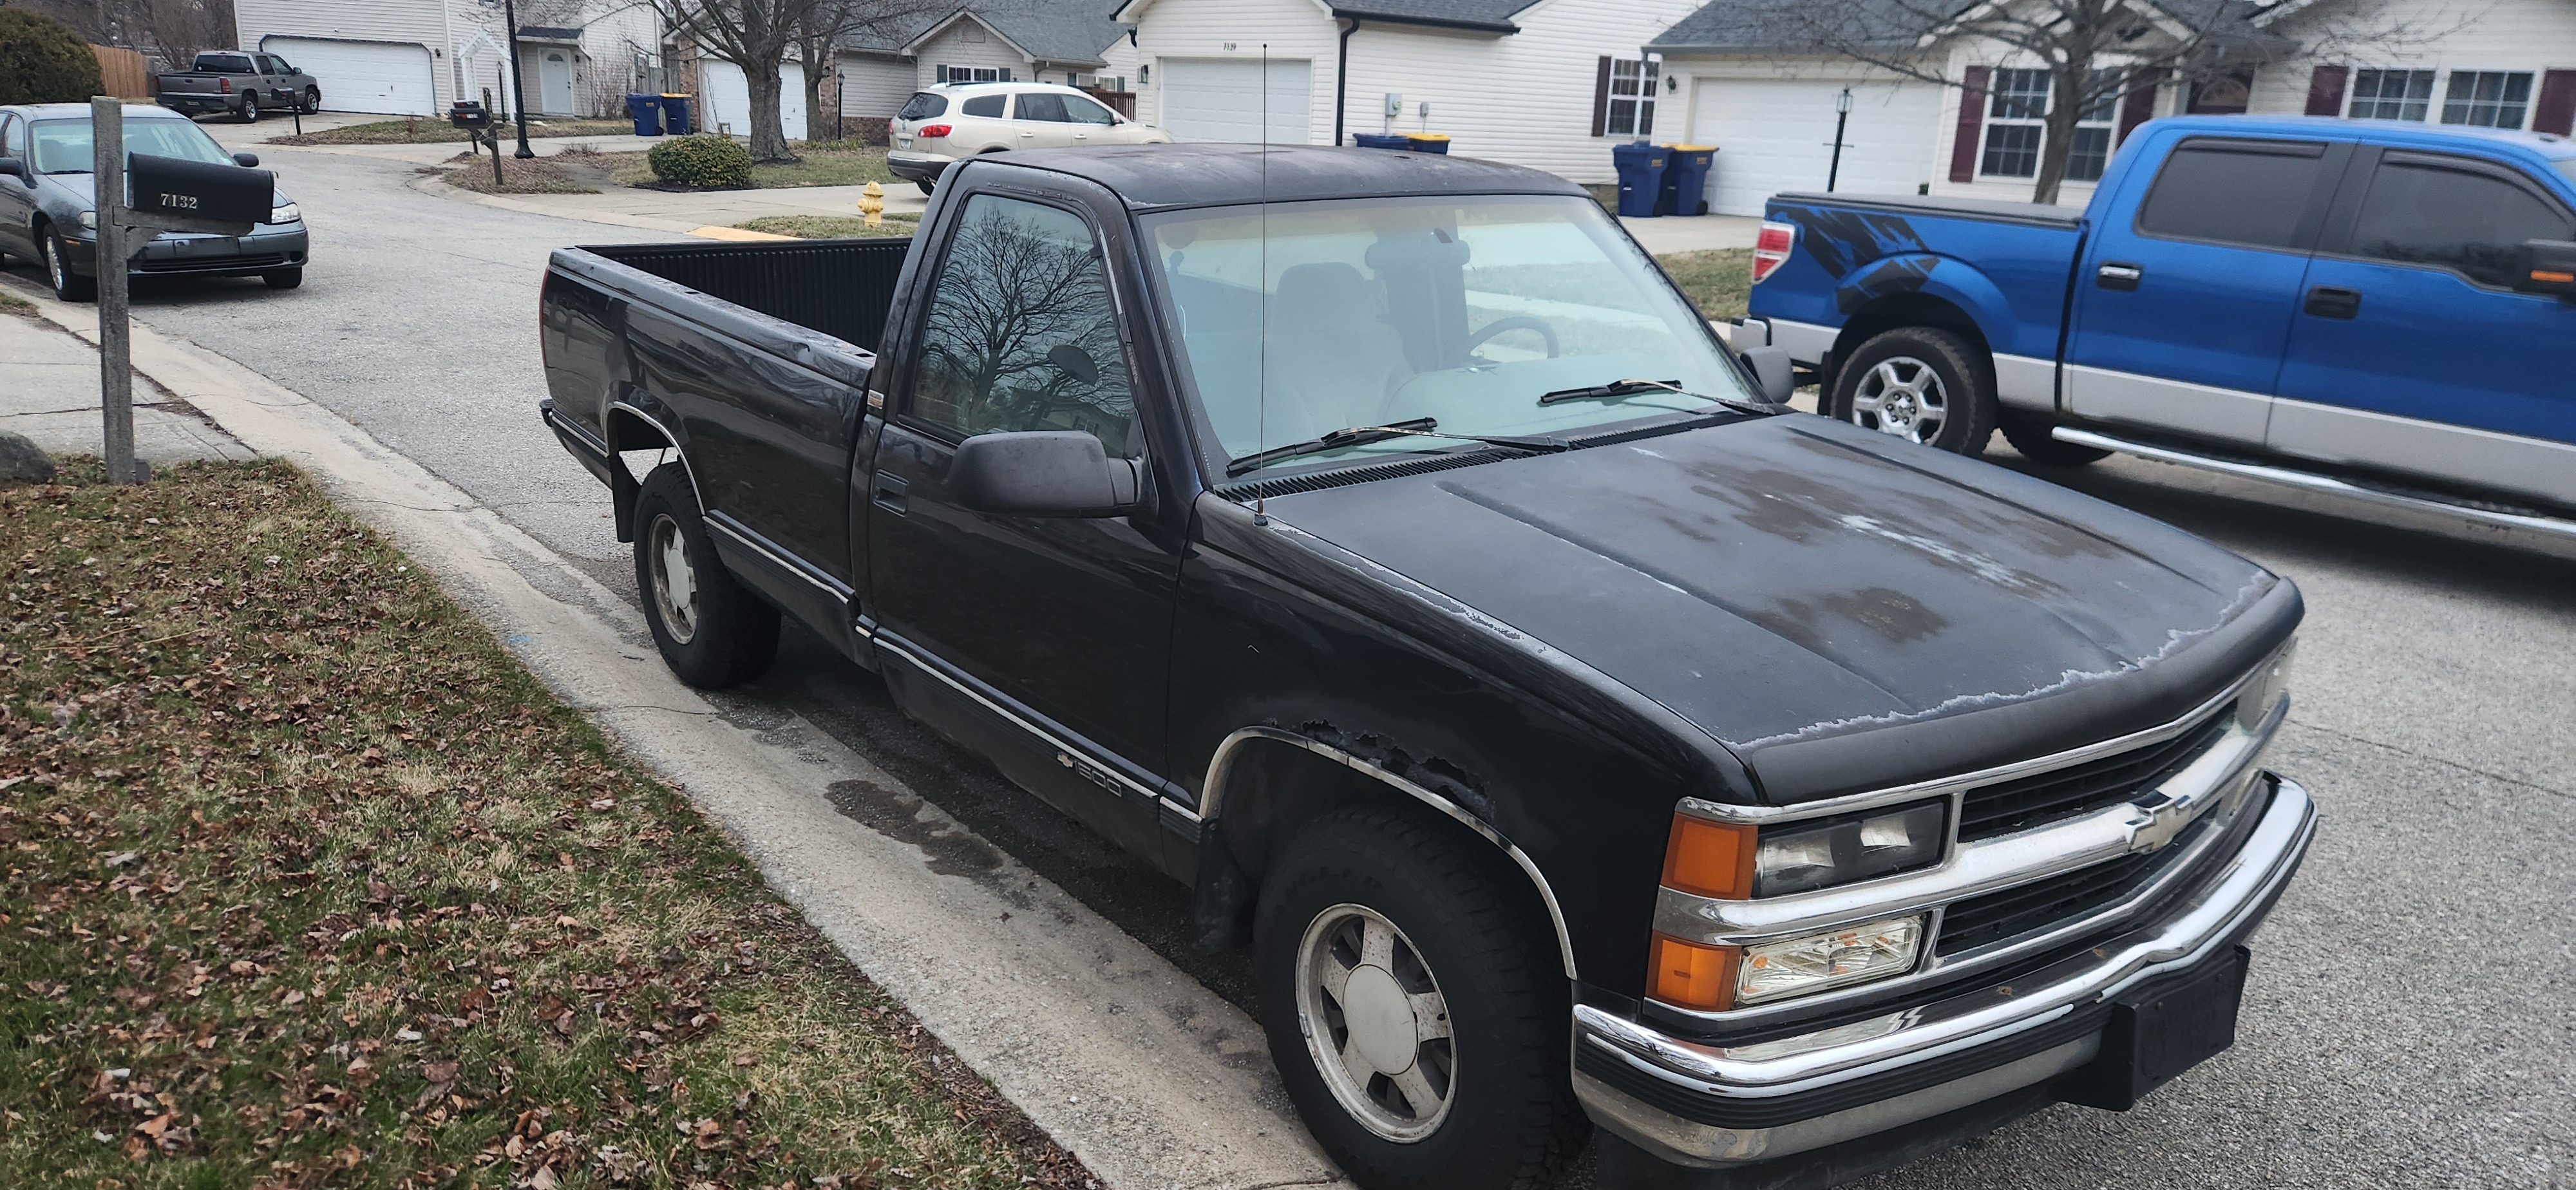 Truck Losing power and eventually dying - 2003 Chev Silverado 1500 5.3L v8, Page 2